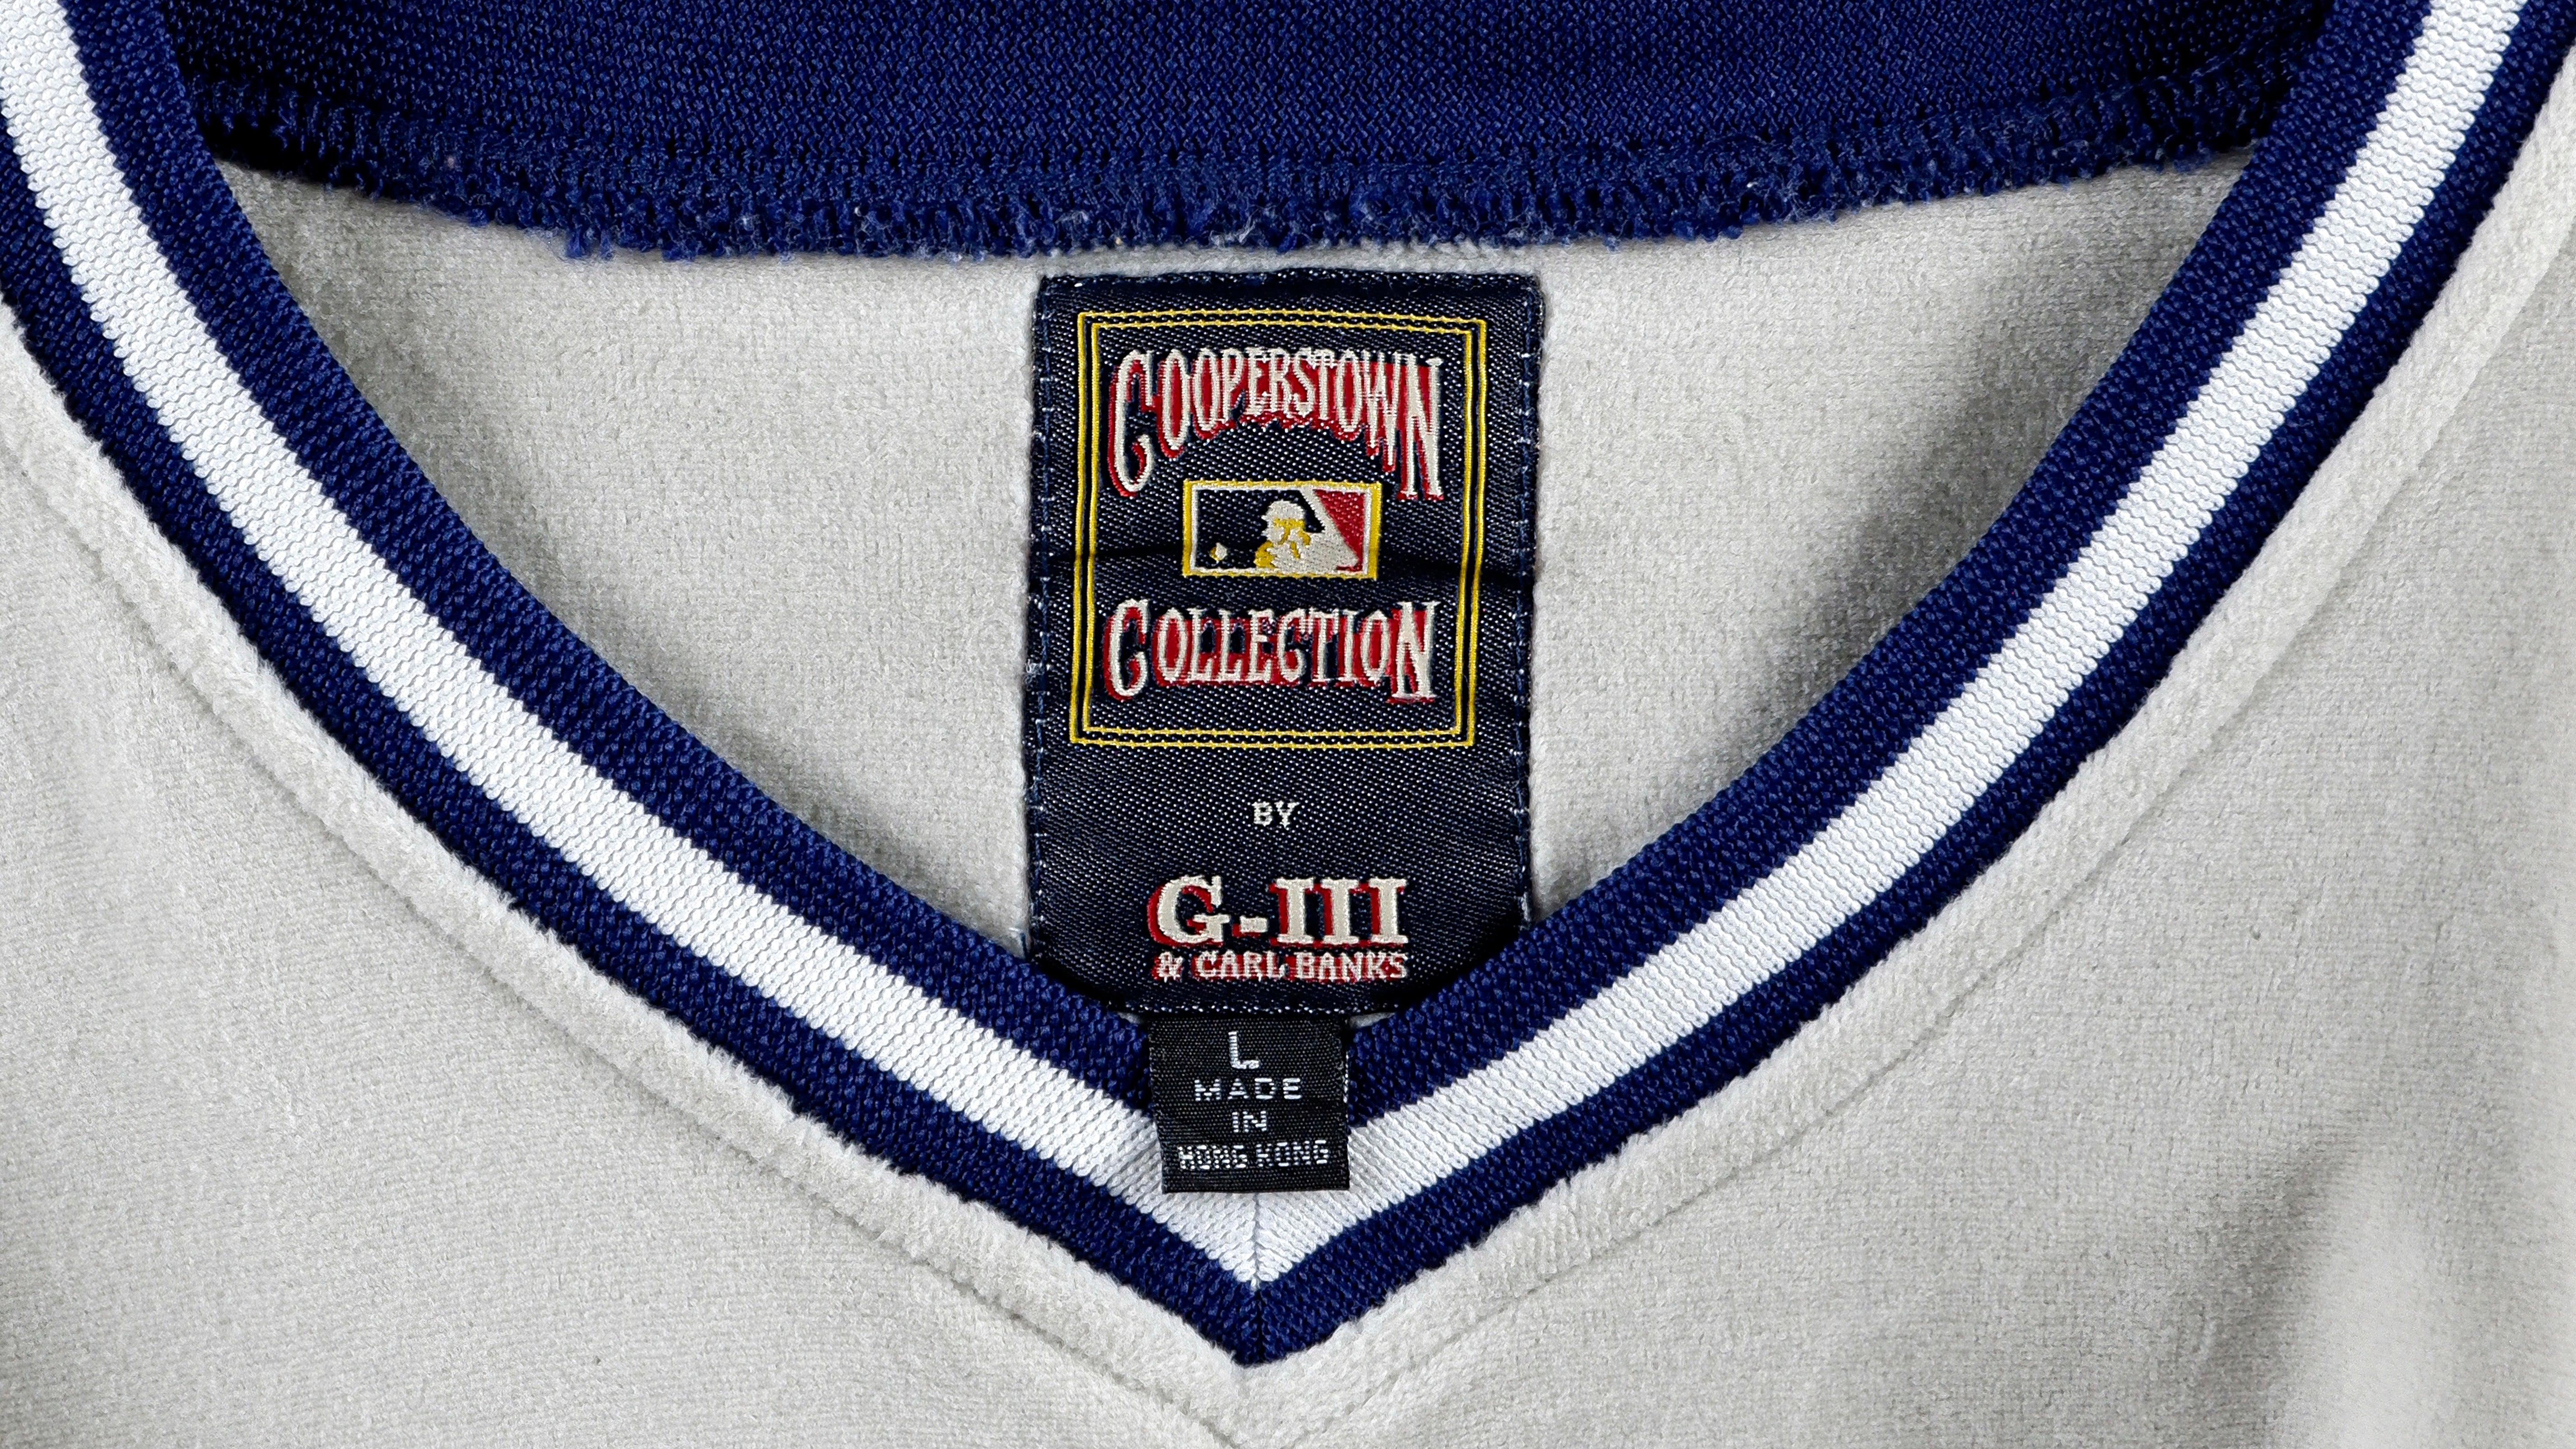 Official New York Yankees Cooperstown Collection Gear, Vintage Yankees  Jerseys, Hats, Shirts, Jackets